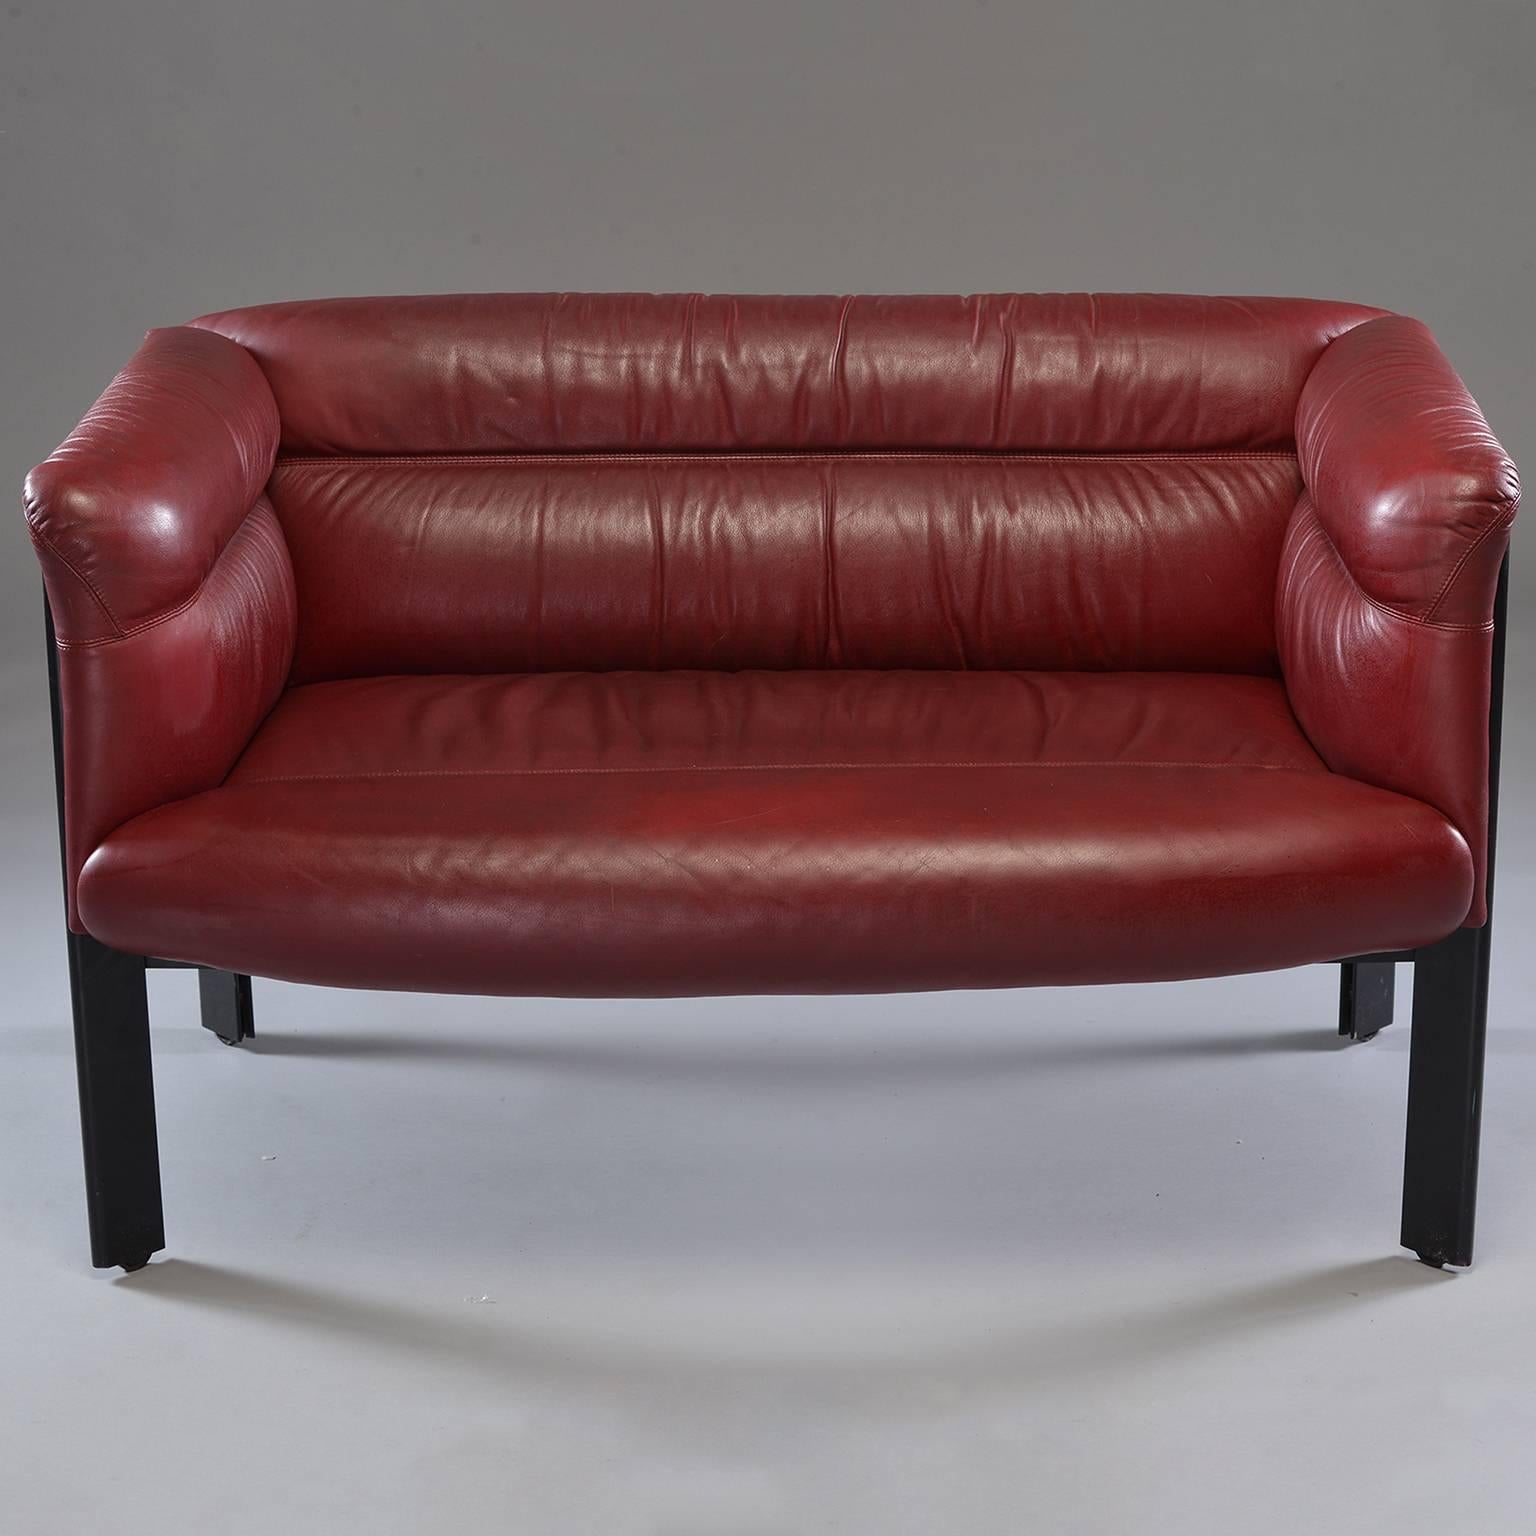 Burgundy leather settee by Italian maker Poltrona Frau, circa 1970s. Black metal legs have casters. Leather on back is marked by maker. 